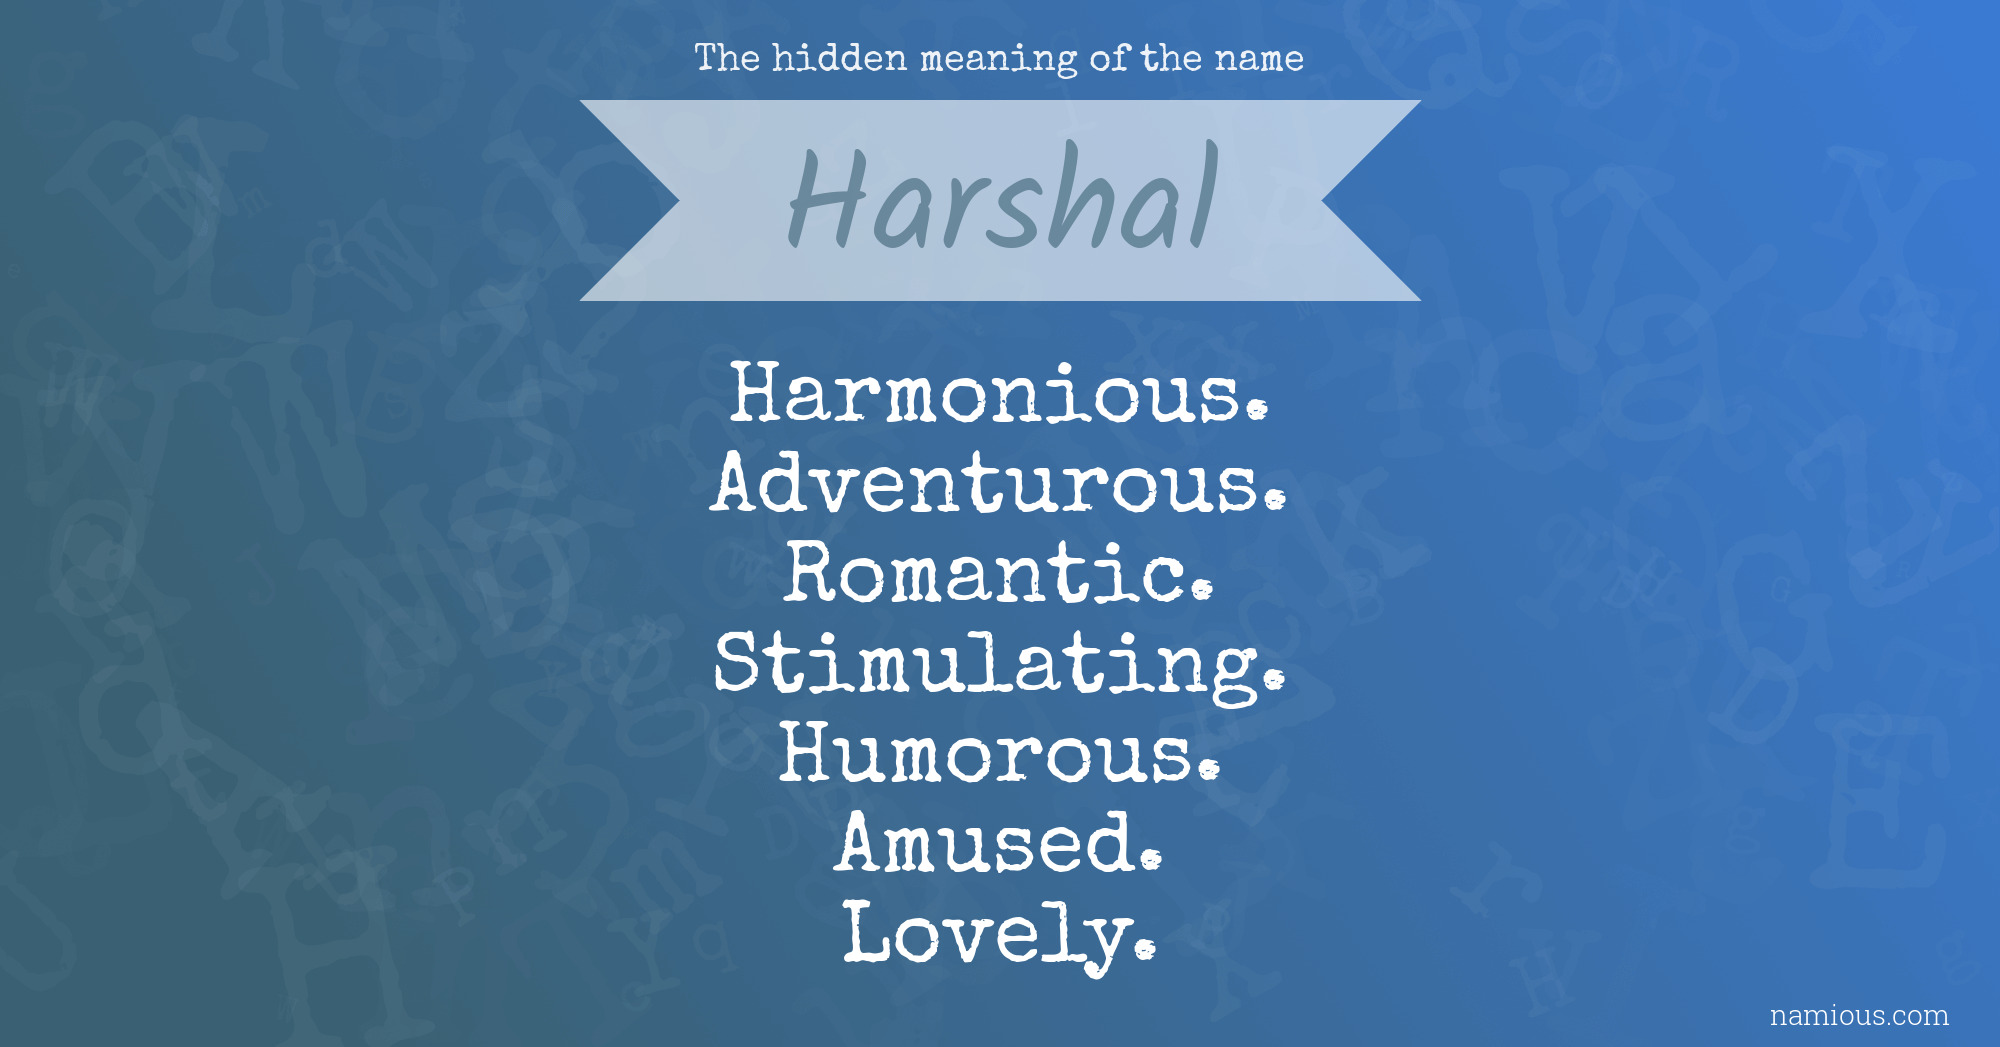 The hidden meaning of the name Harshal